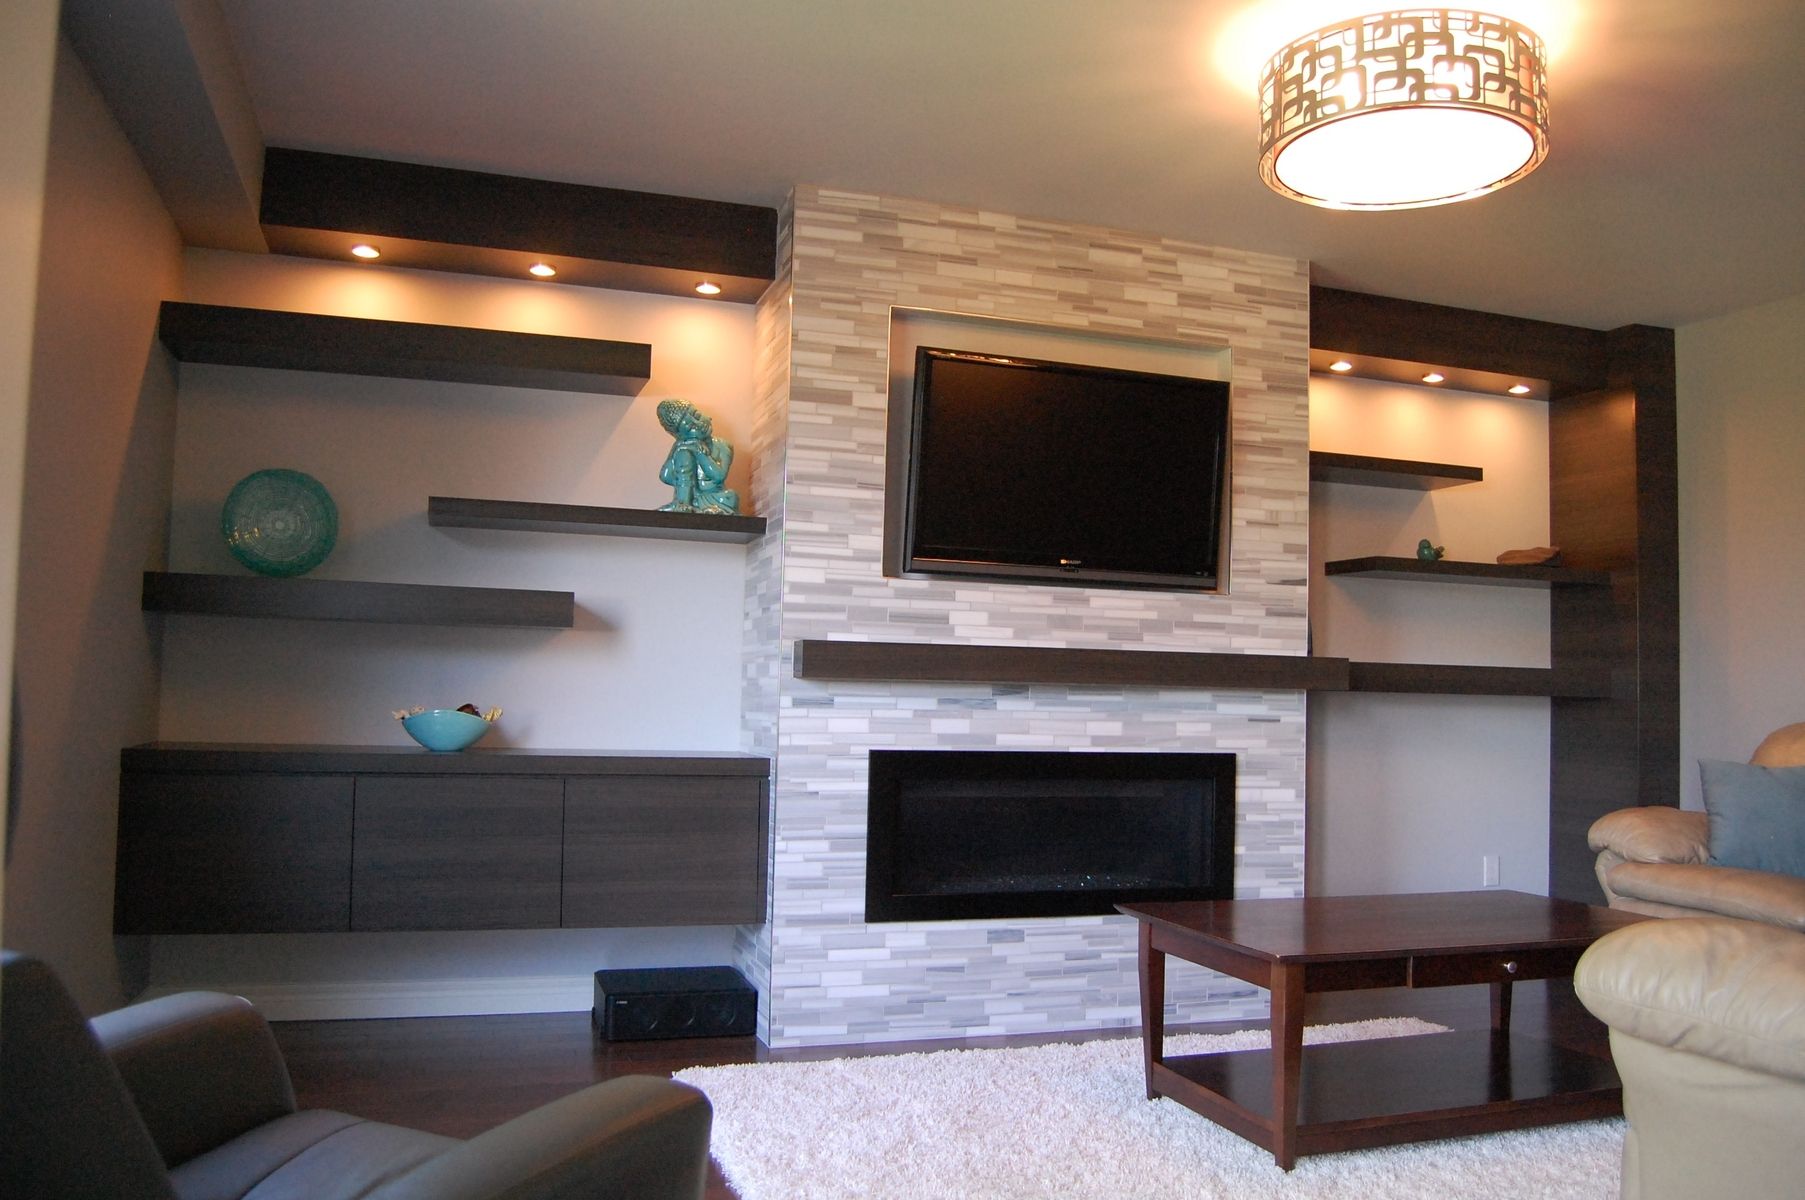 Tv Wall Mount Above Fireplace Fresh Custom Modern Wall Unit Made Pletely From A Printed